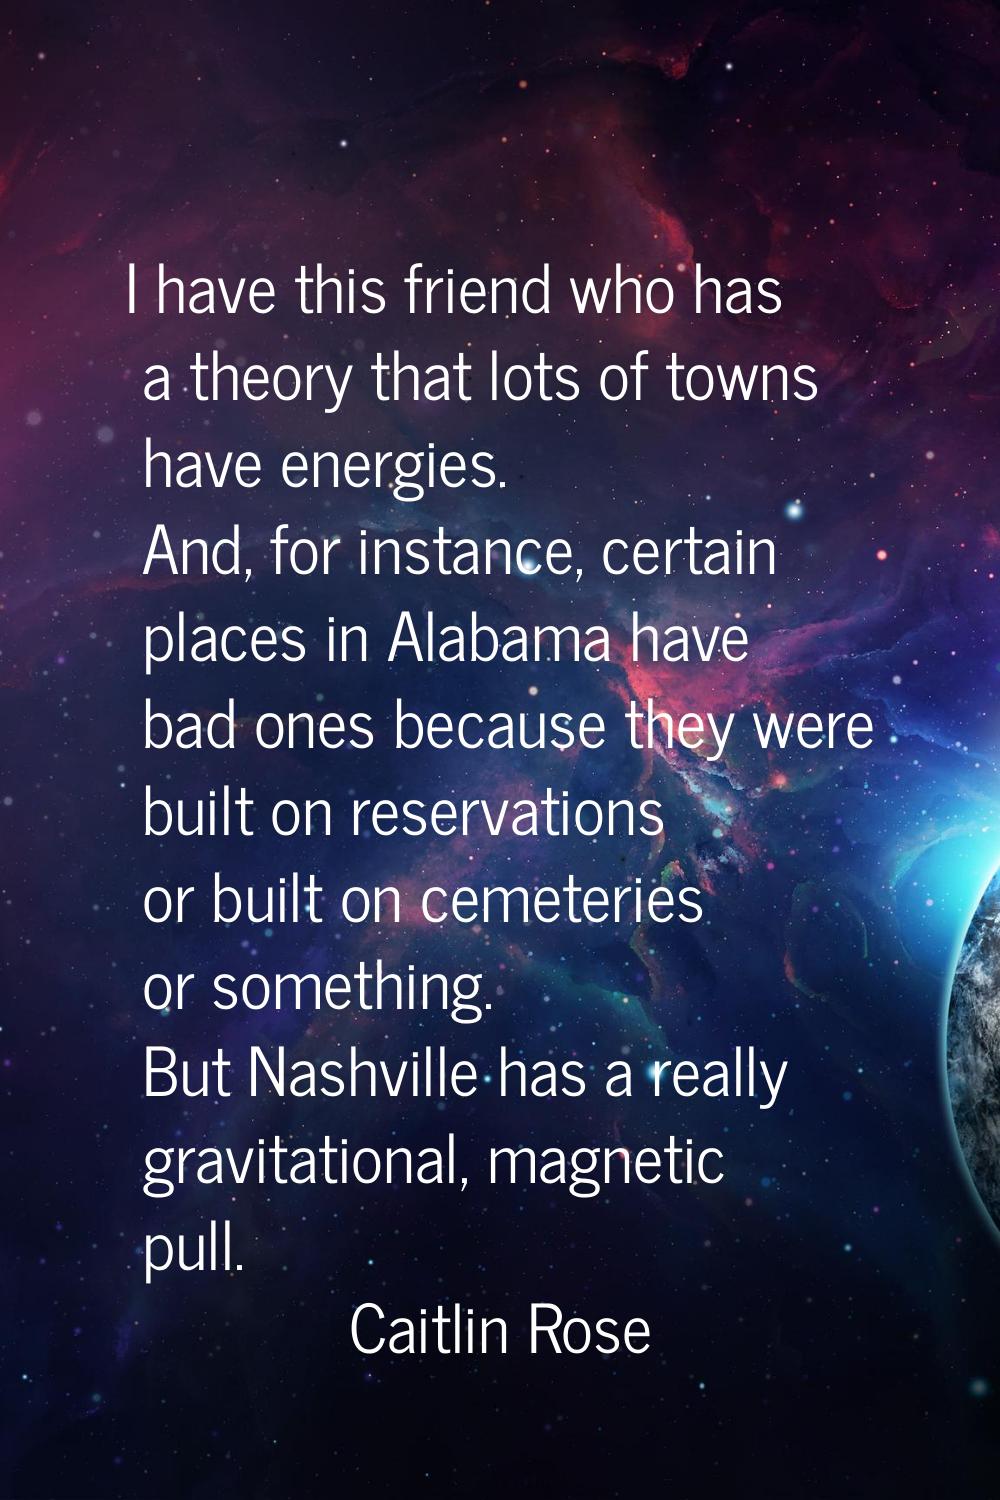 I have this friend who has a theory that lots of towns have energies. And, for instance, certain pl